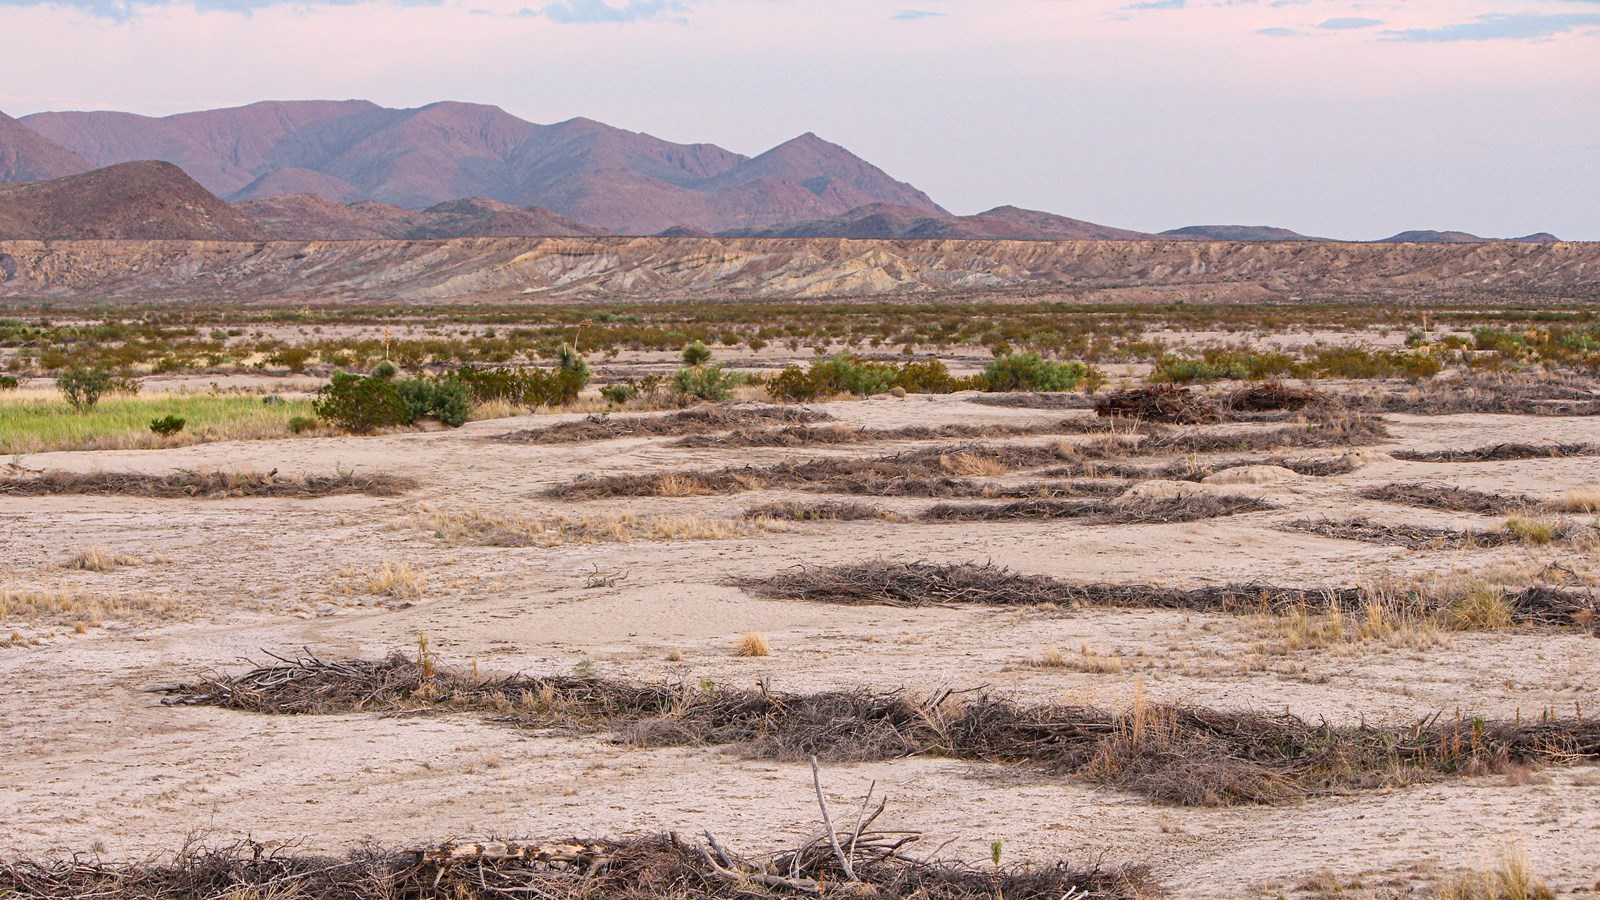 Lines of dead vegetation are laid out on the bare desert soil, in hopes of catching runoff from rain